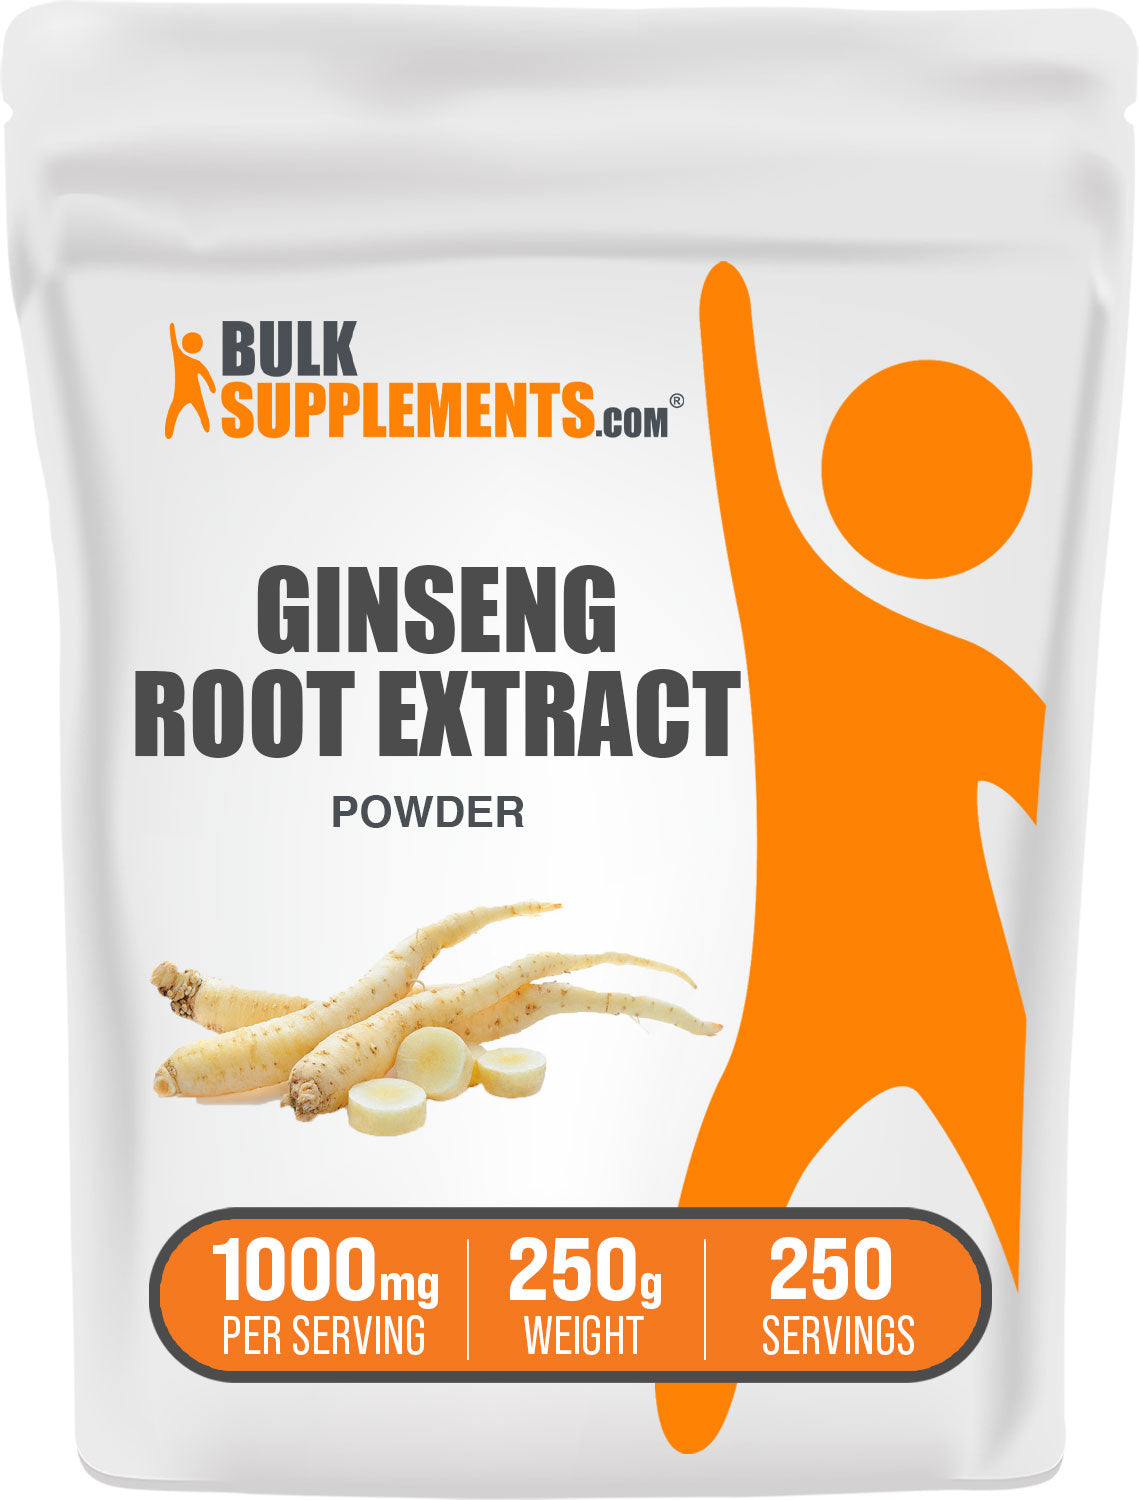 Ginseng Root Extract 250g